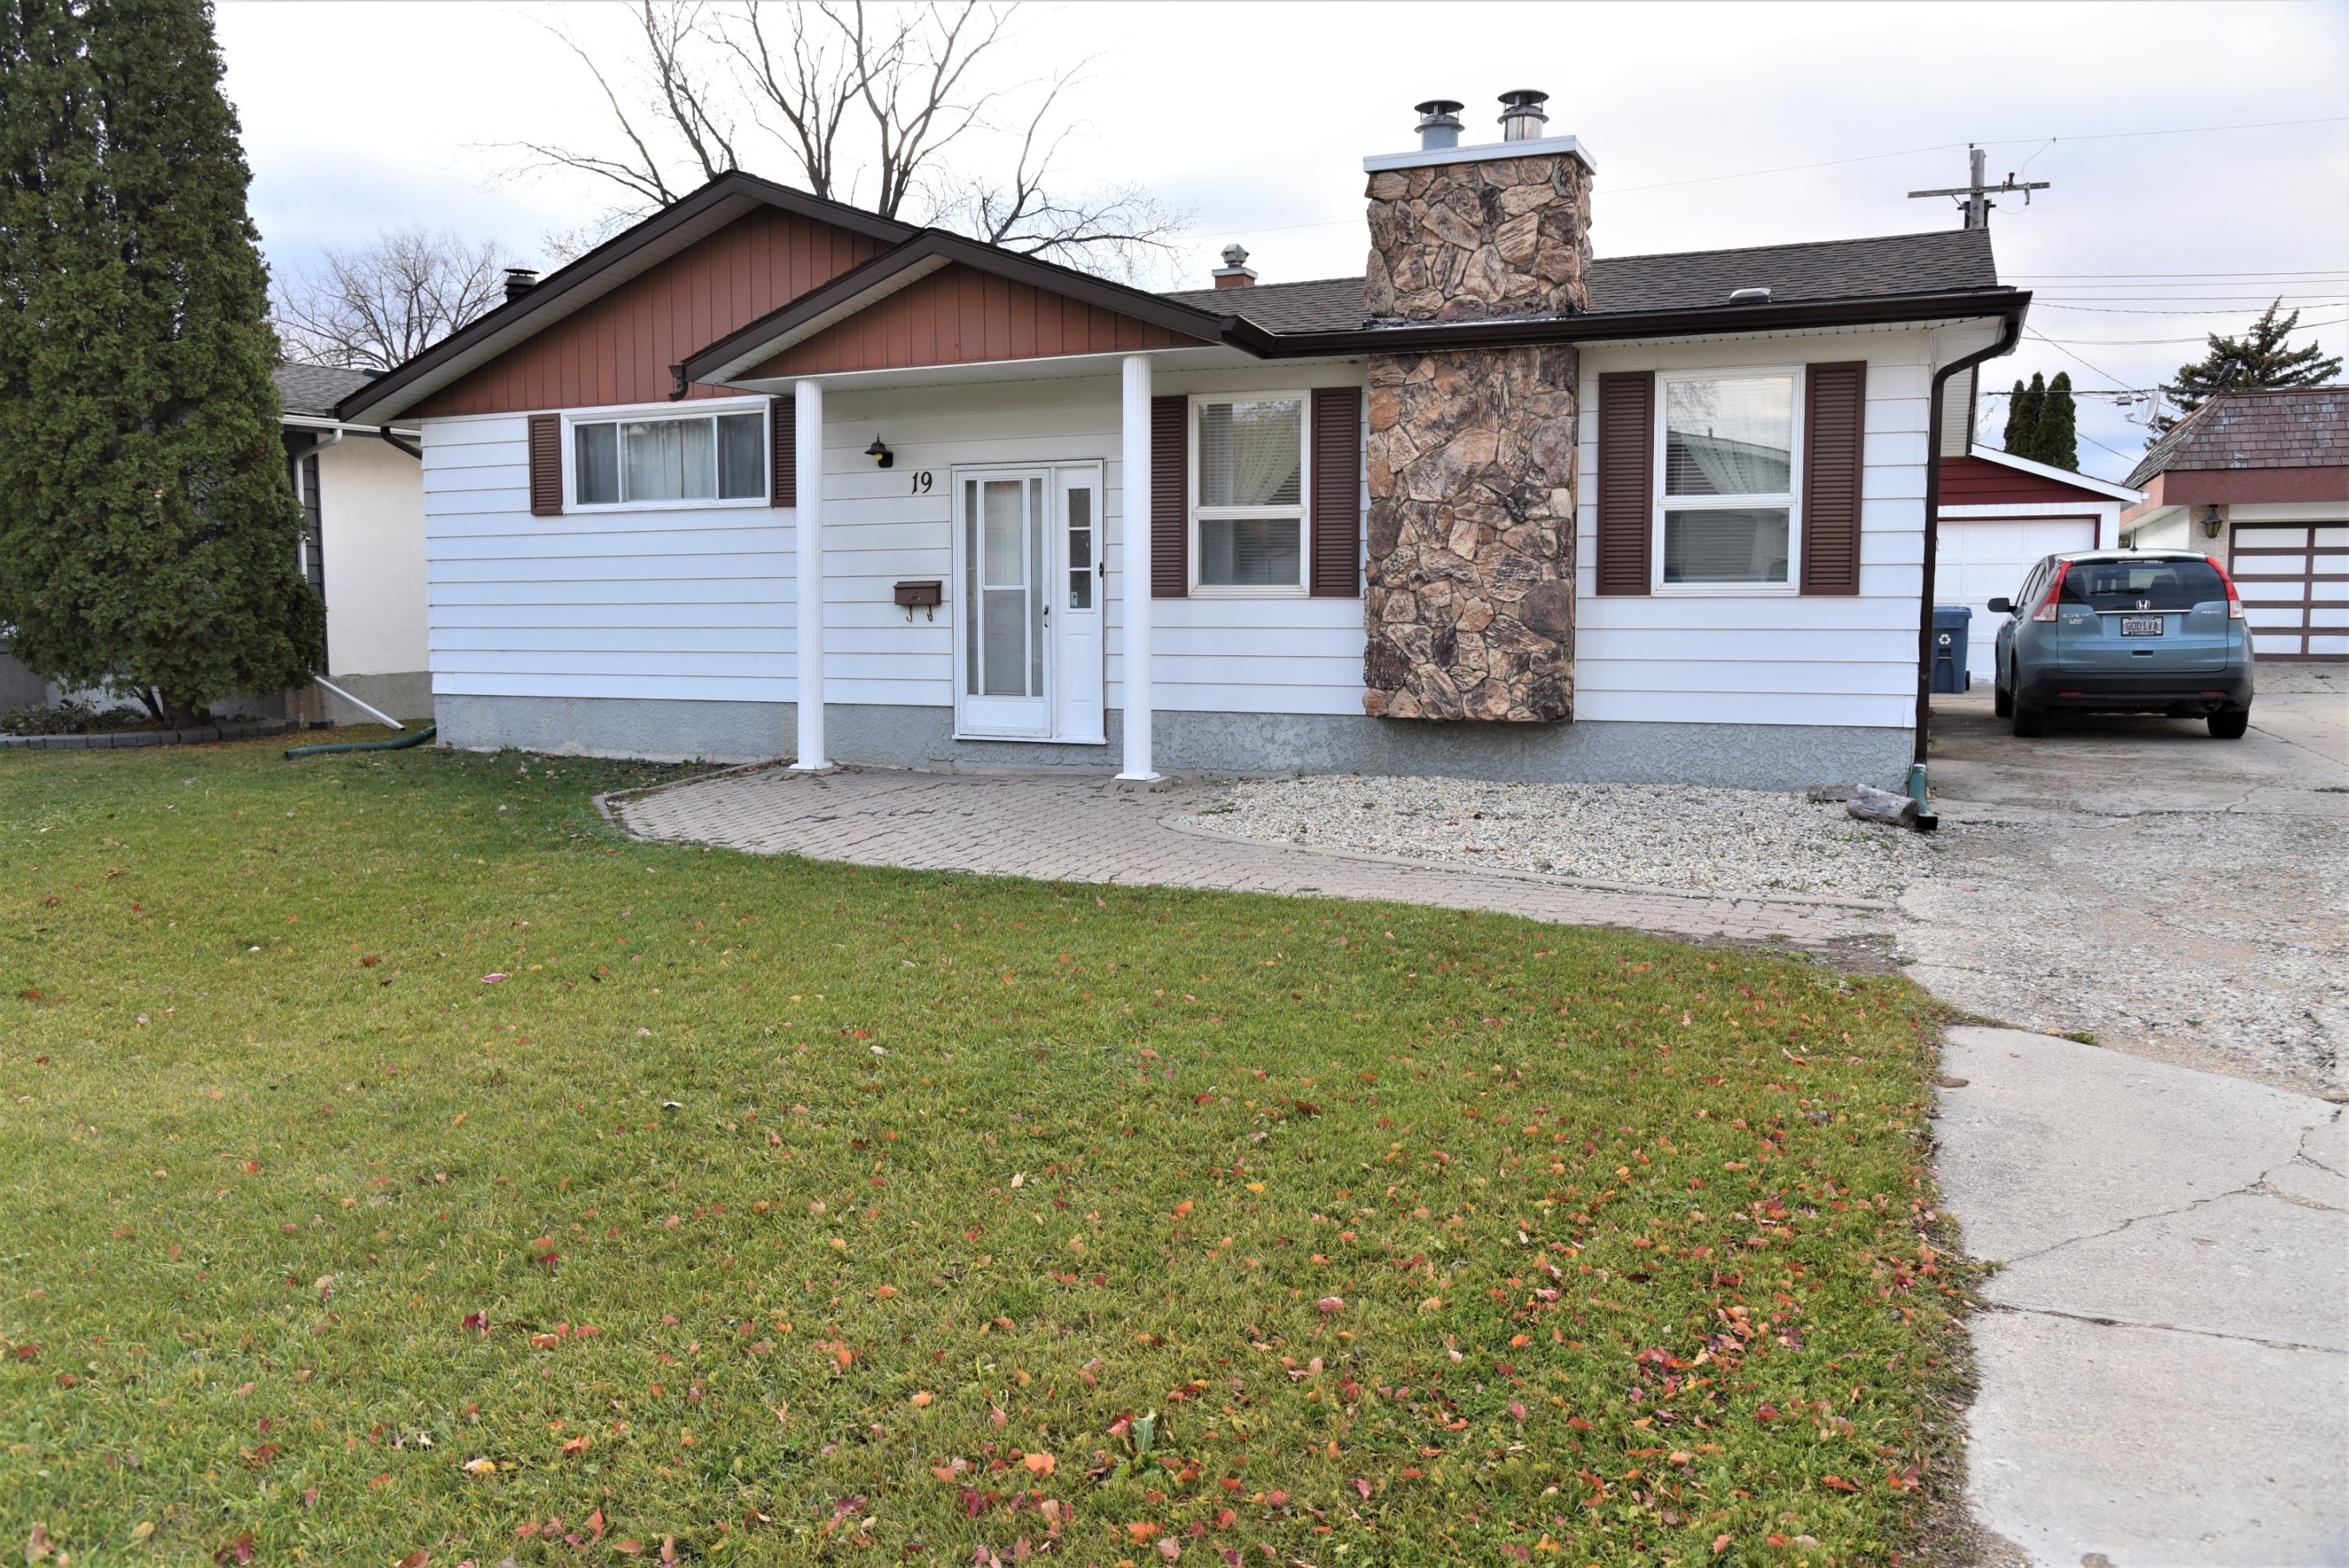 Updated family home in Windsor Park 